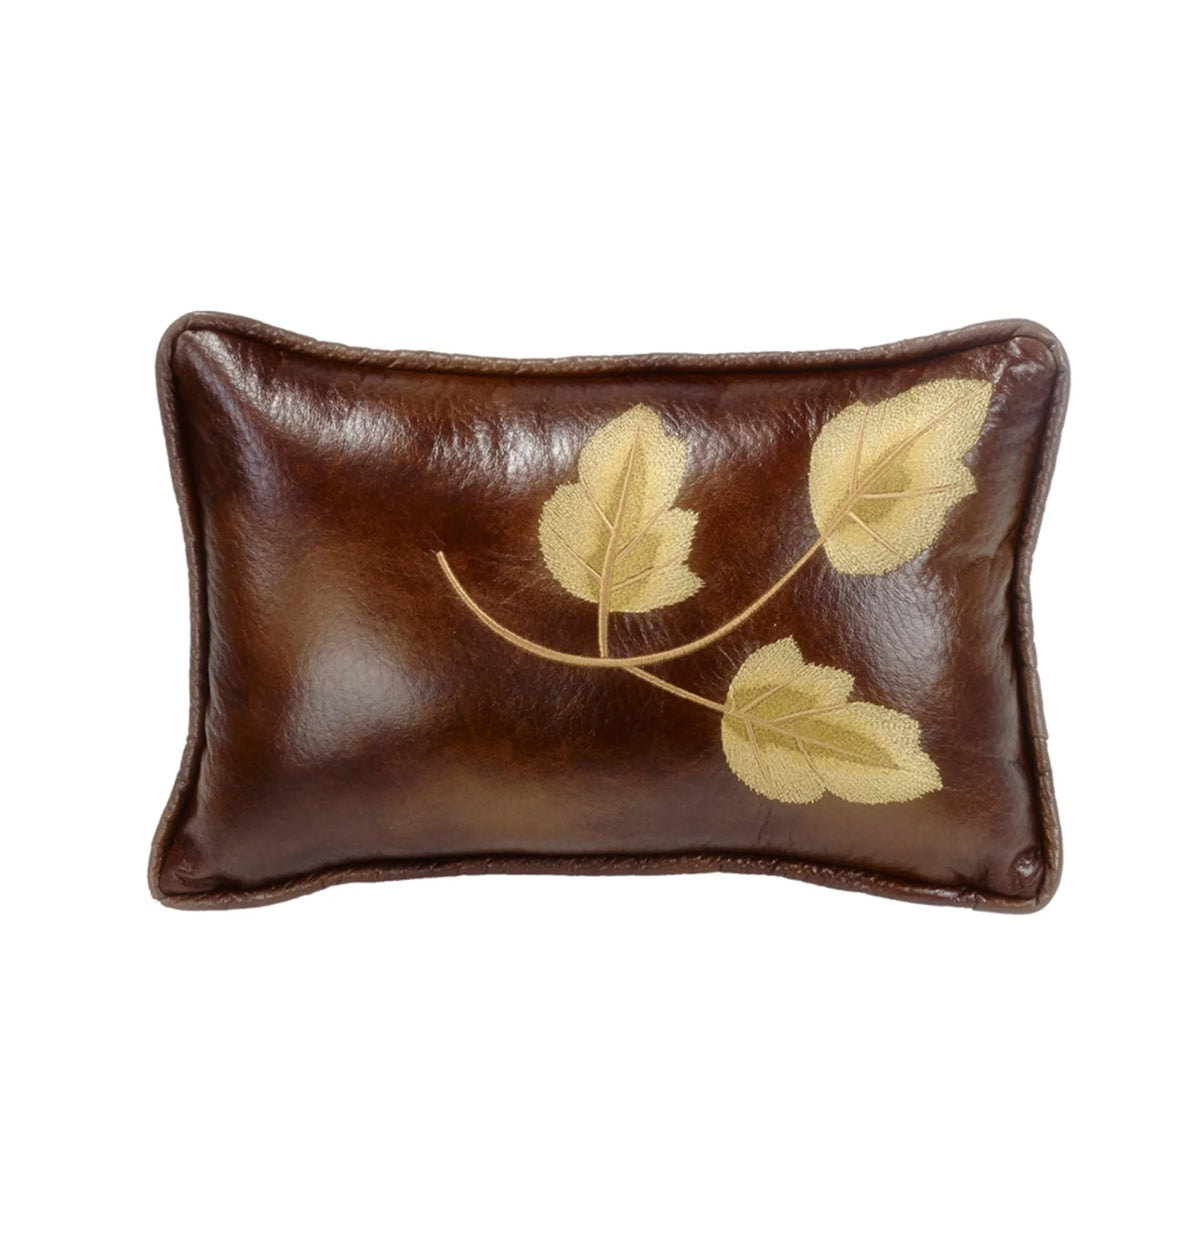 Highland Lodge 12" x 19" Faux Leather Lumbar Pillow